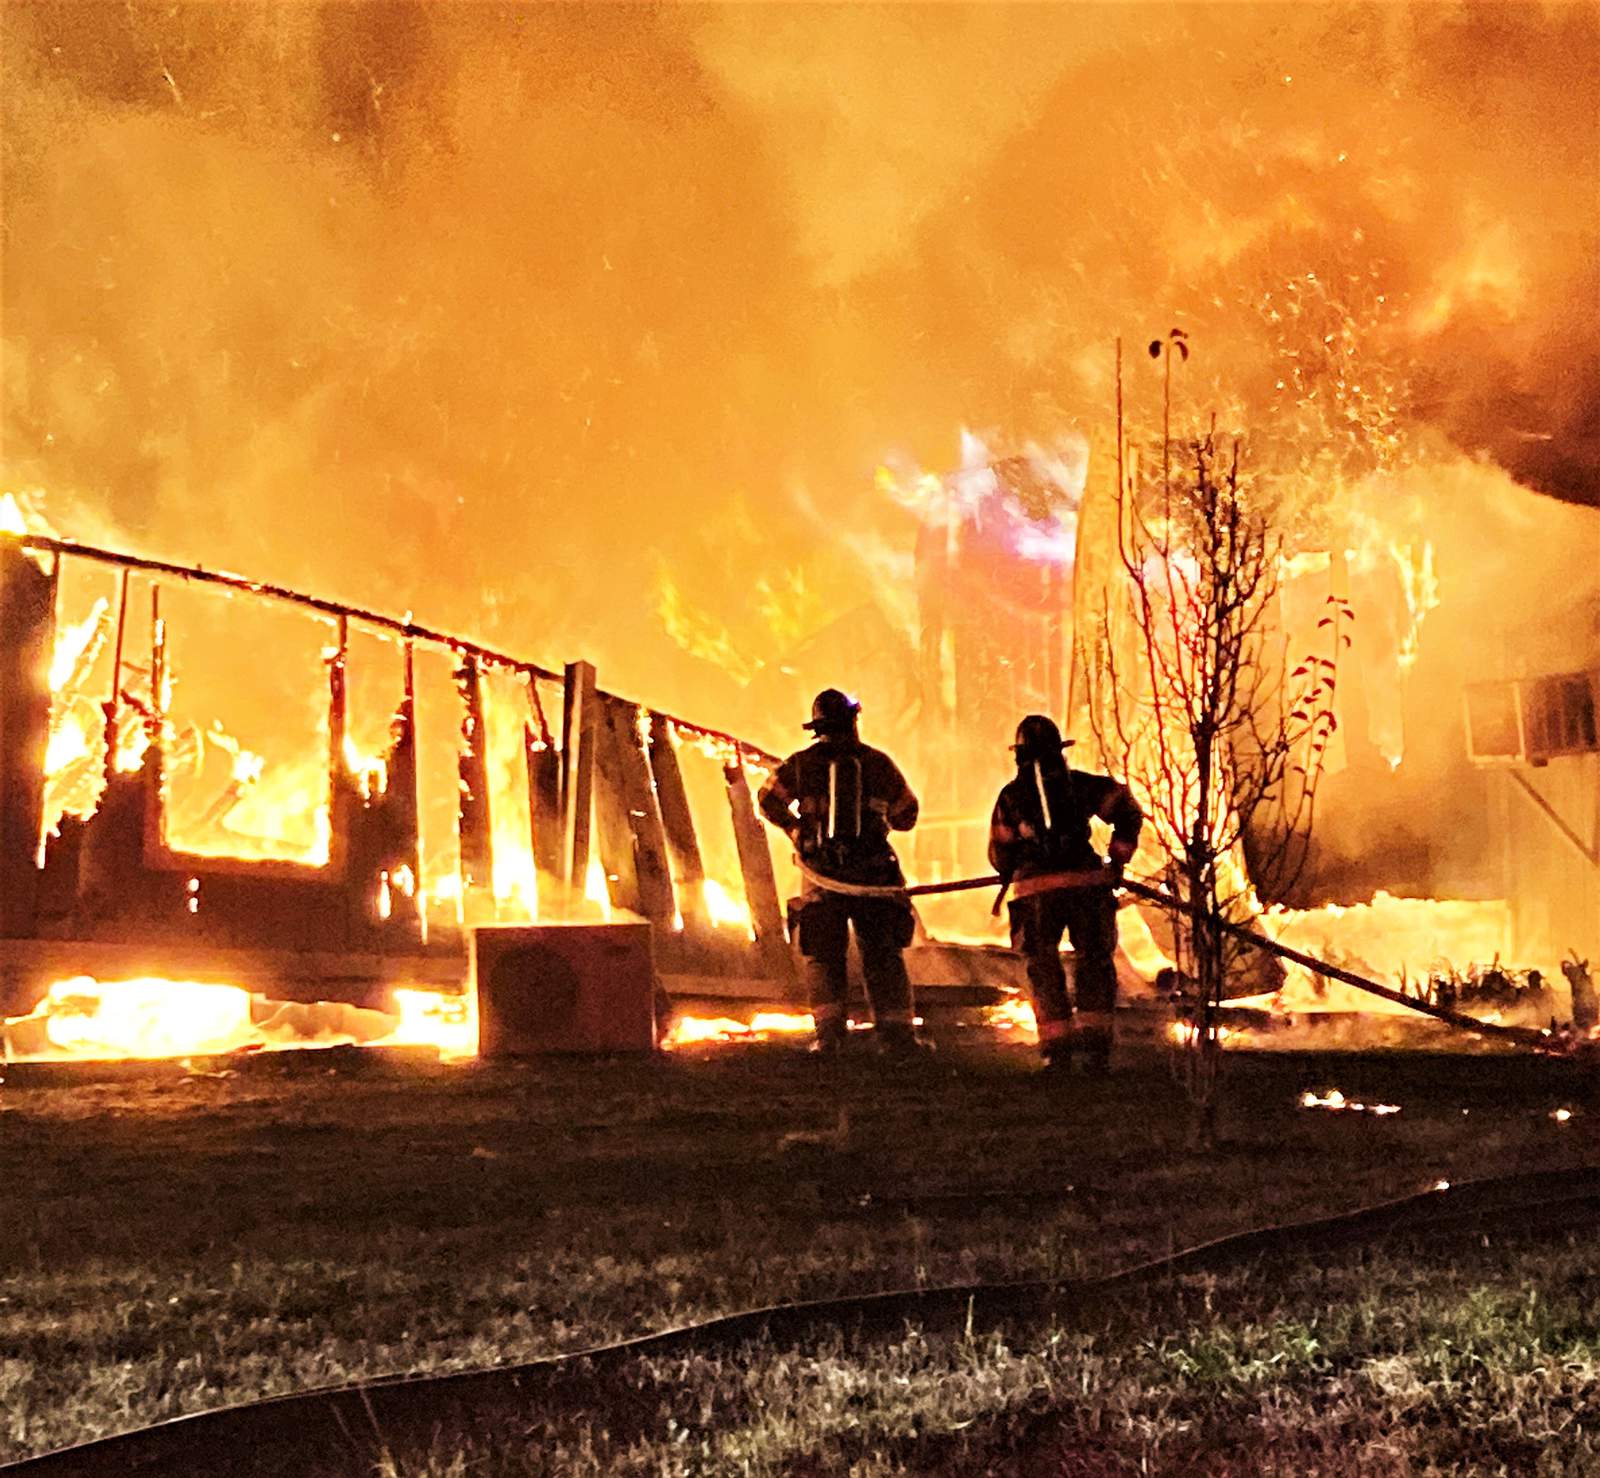 Photos show firefighters battle intense house fire in Bradford County